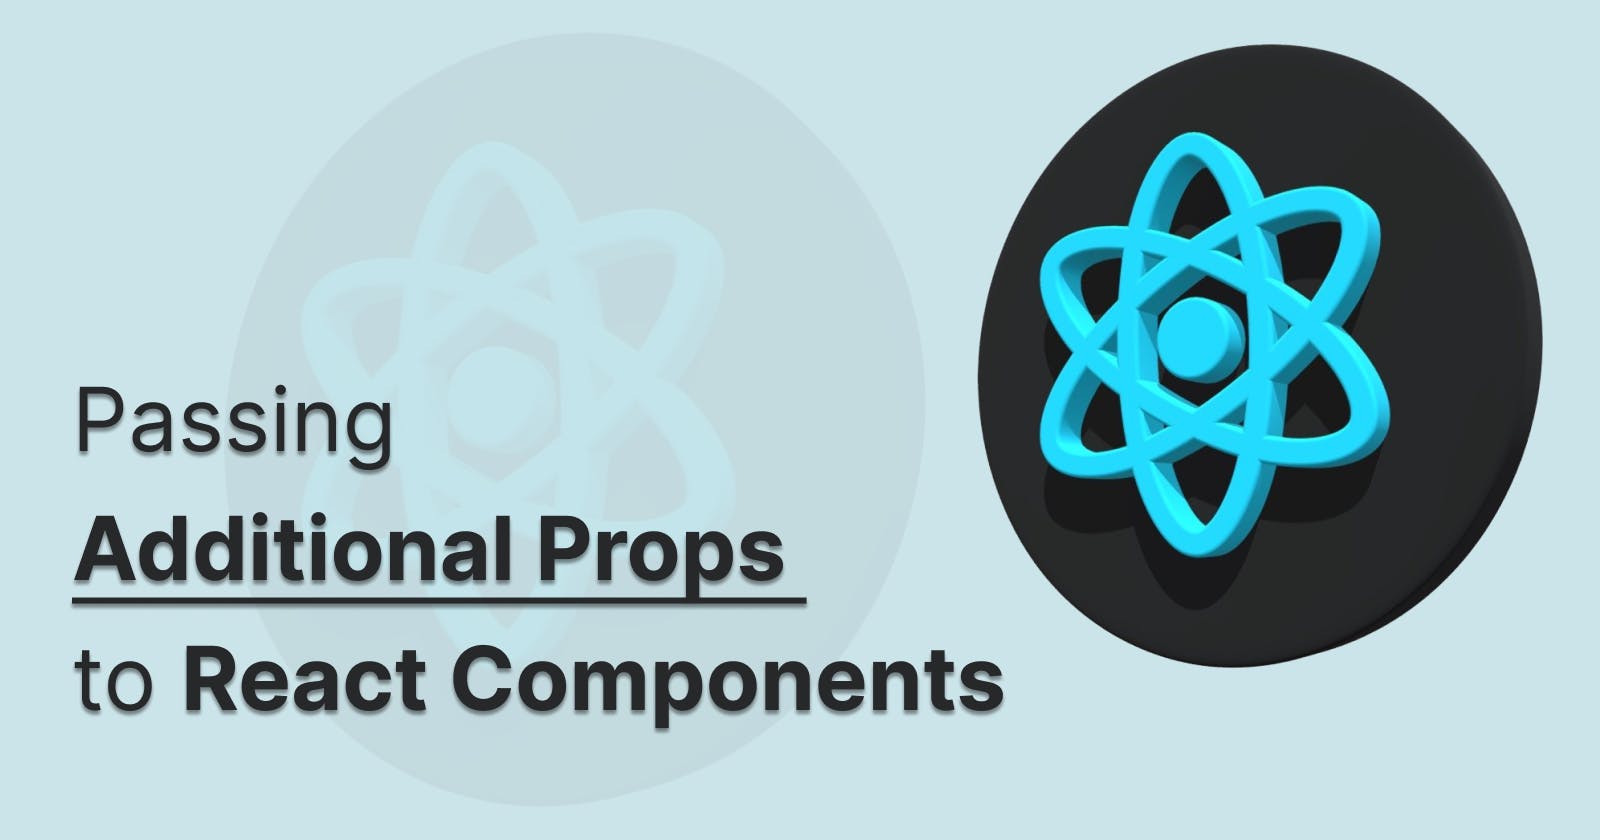 Easy Guide to Passing Additional Props to React Components